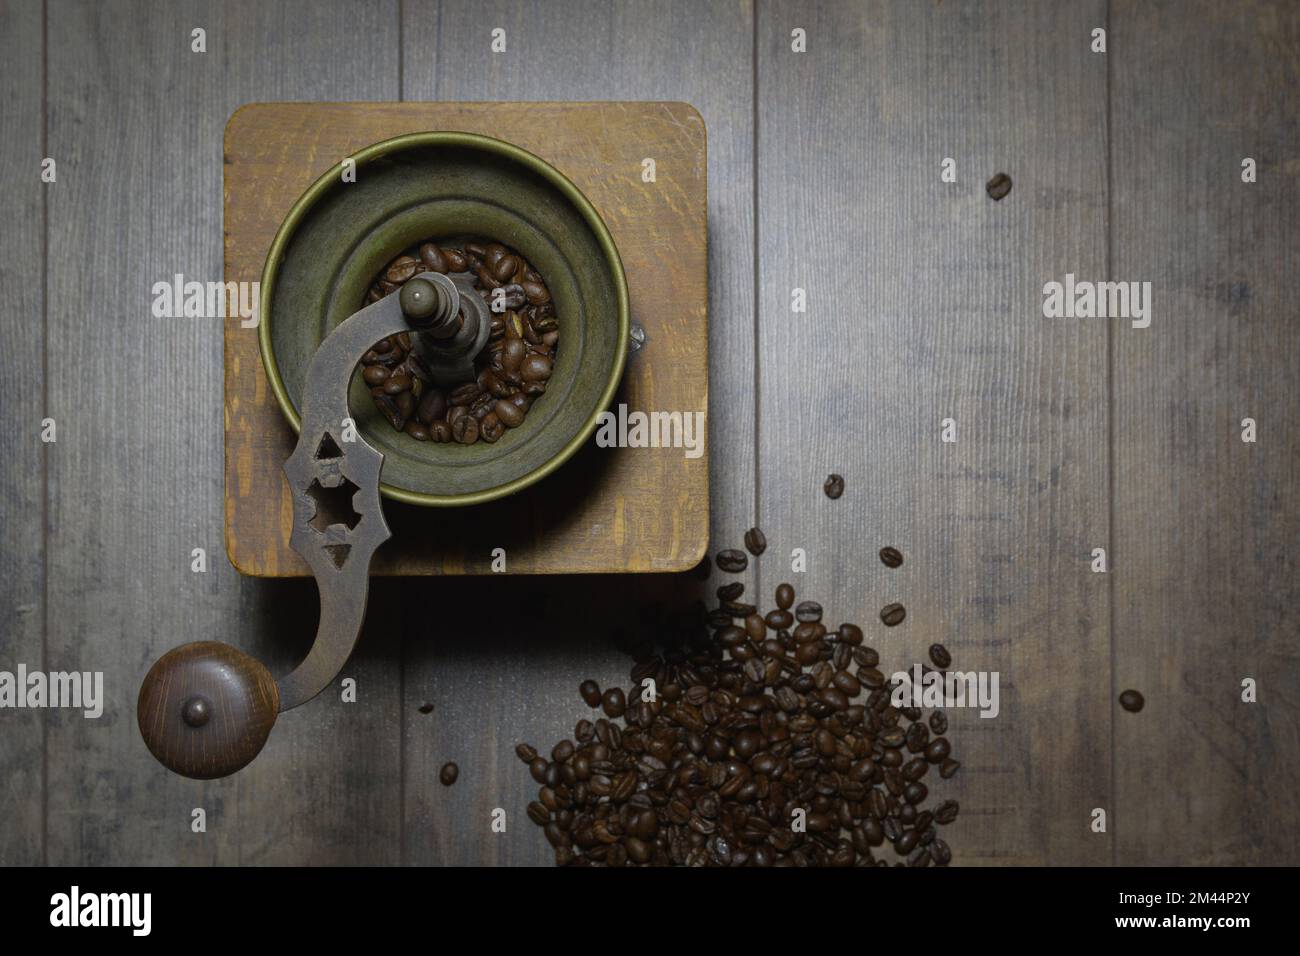 Old manual coffee grinder. Retro background with scattered coffee beans Stock Photo